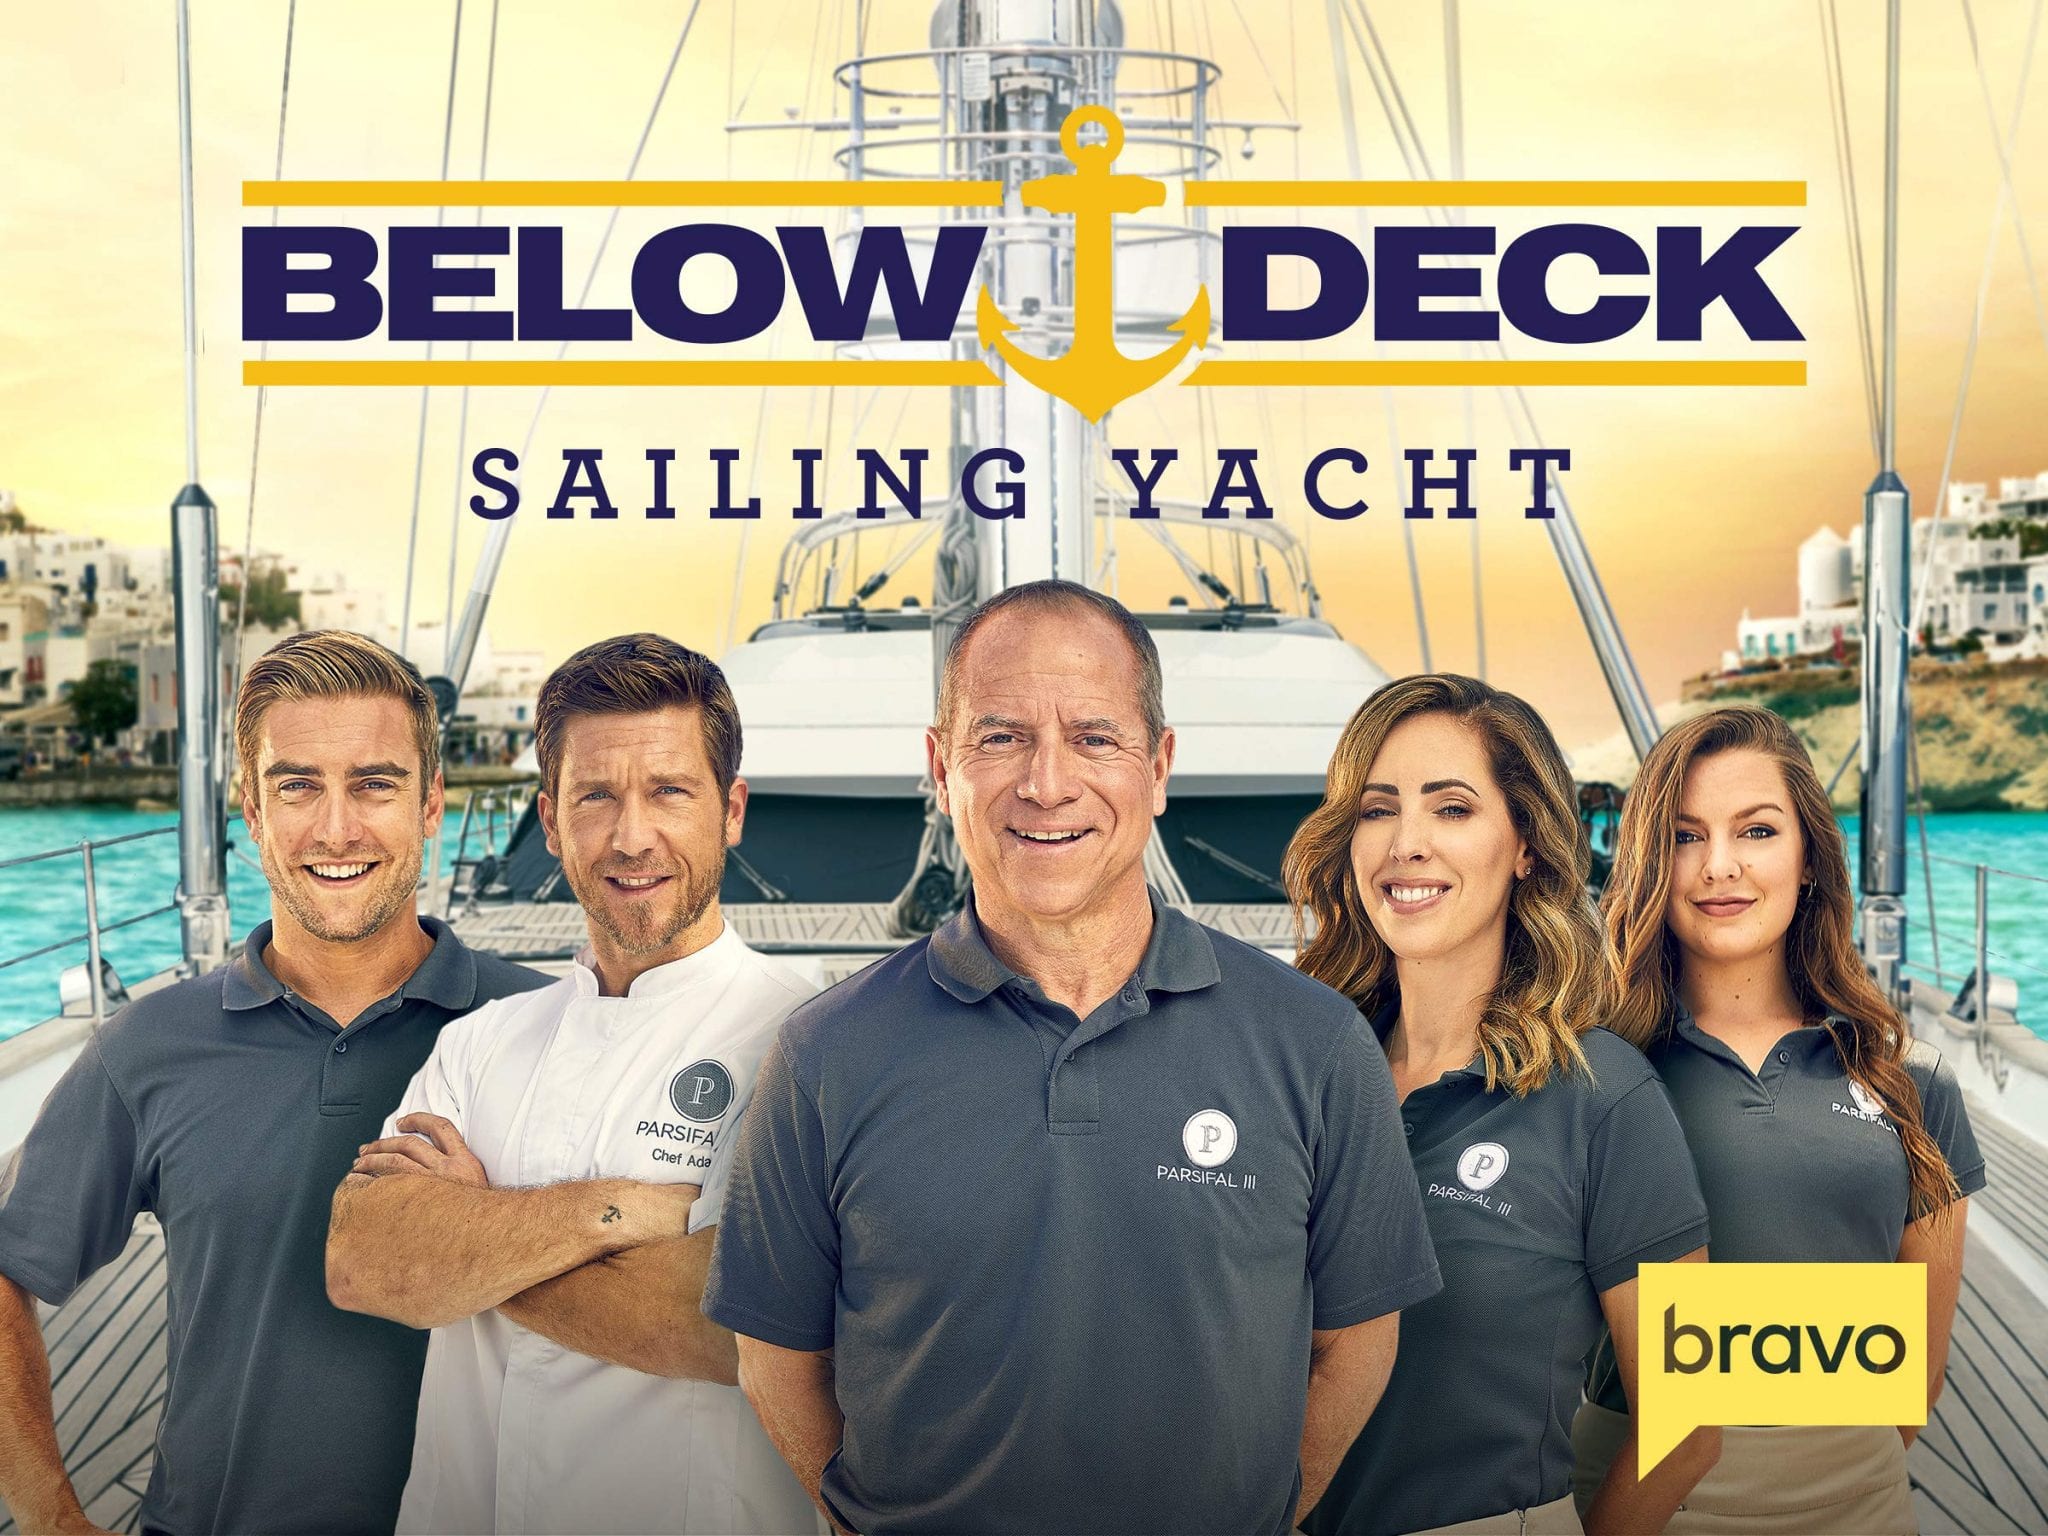 tv shows about yachts